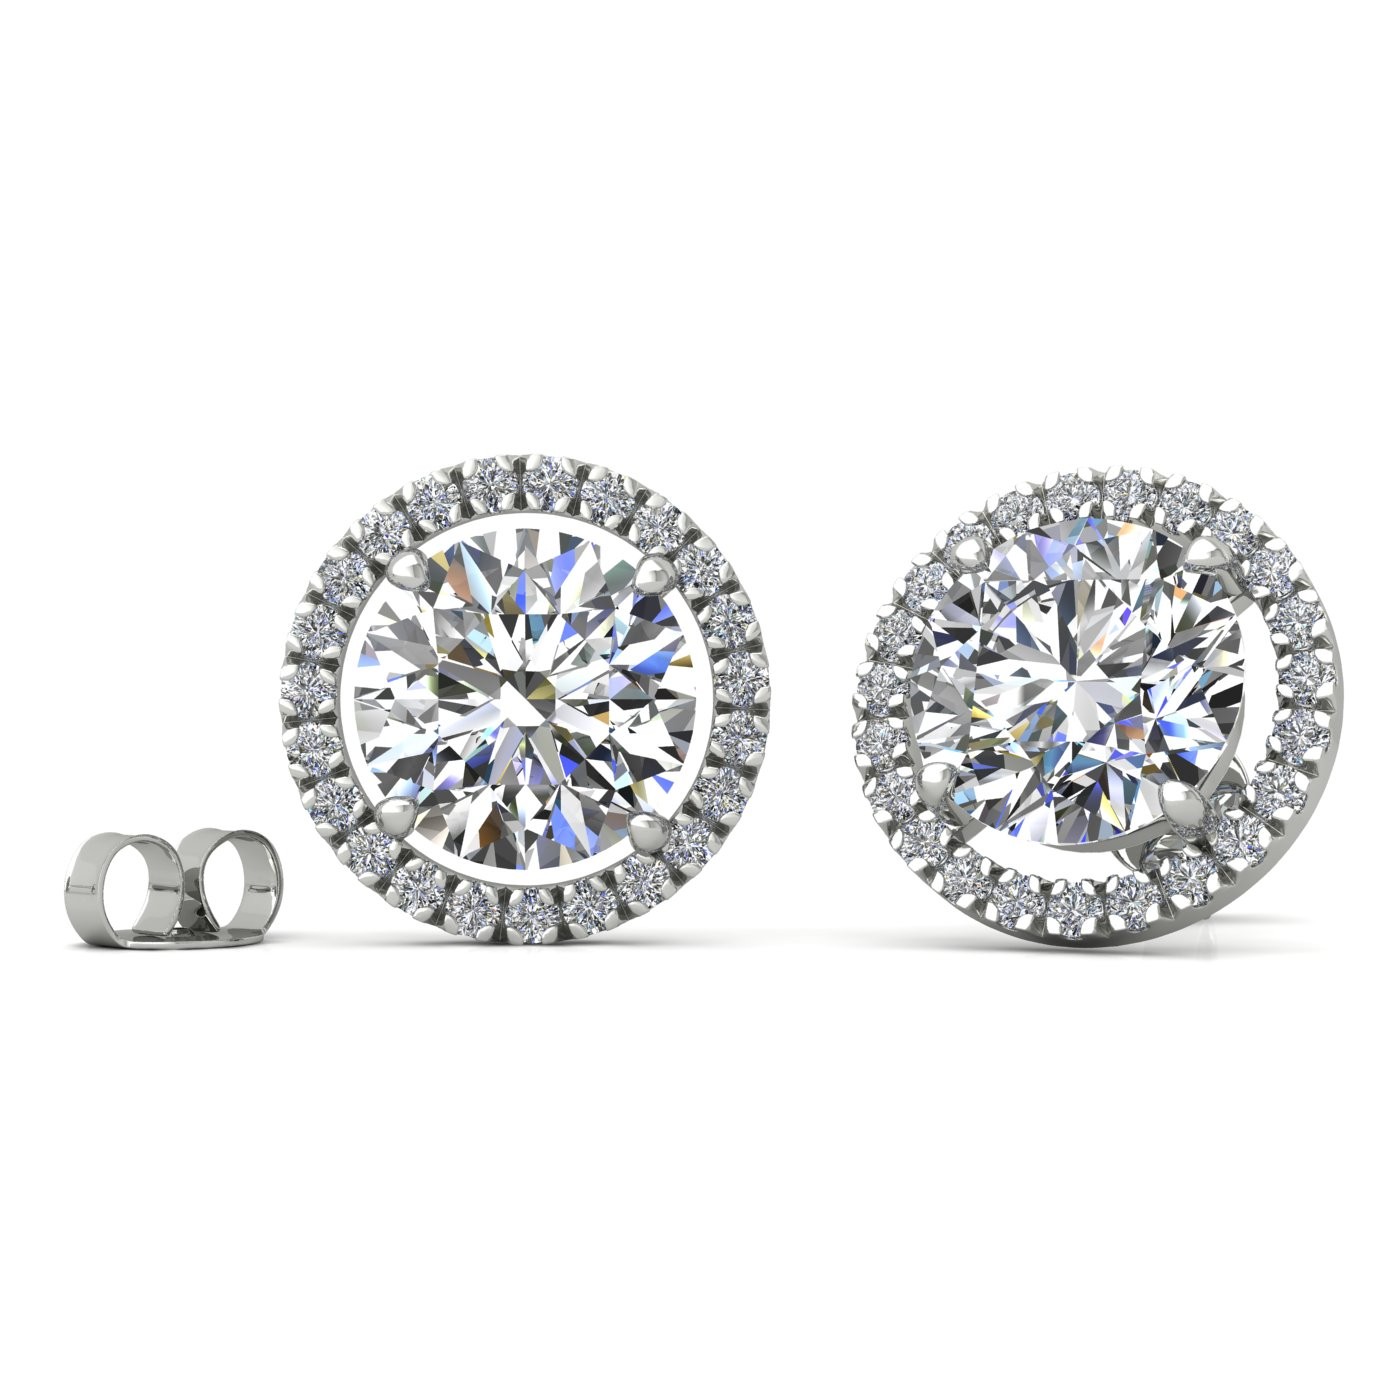 18k white gold  0,7 ct each (1,4 tcw) 4 prongs round brilliant cut halo diamond earring studs Photos & images